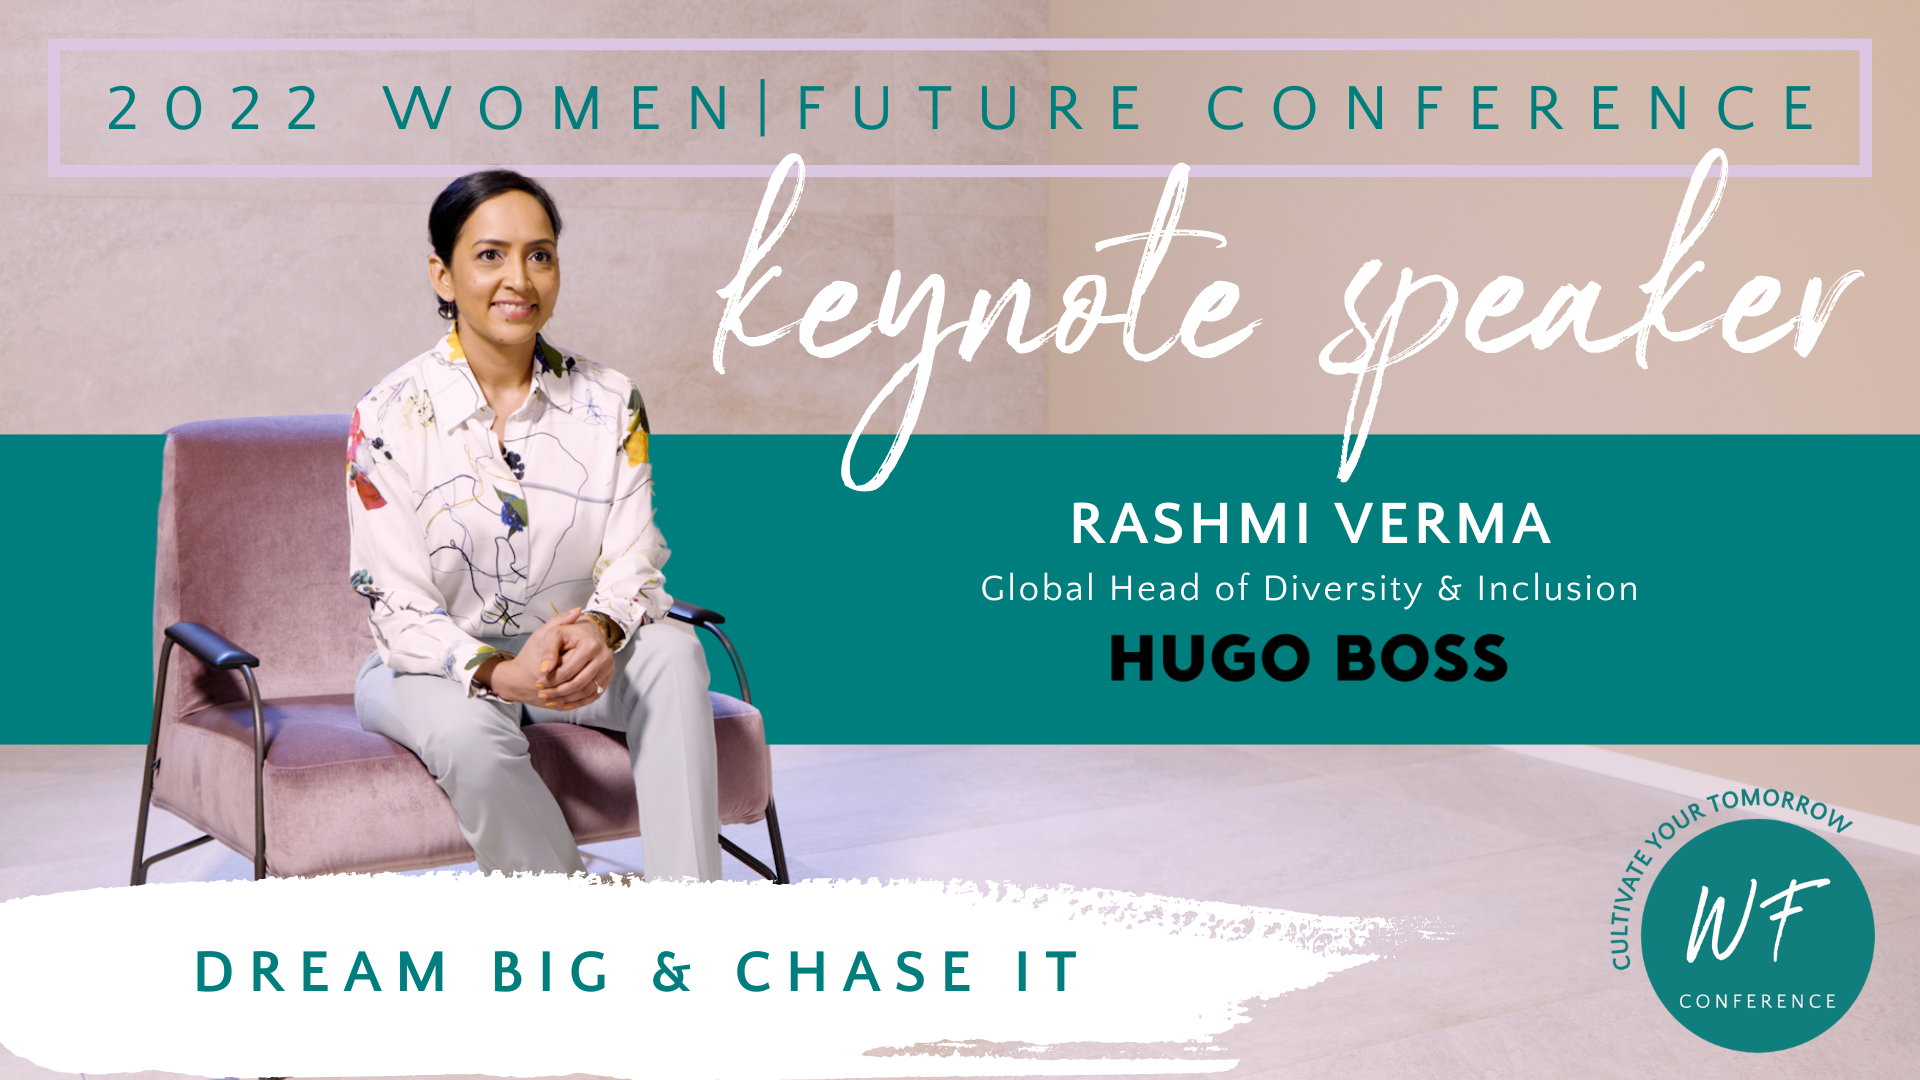 Women|Future Conference Keynote Announced: How to Dream Big & Chase It